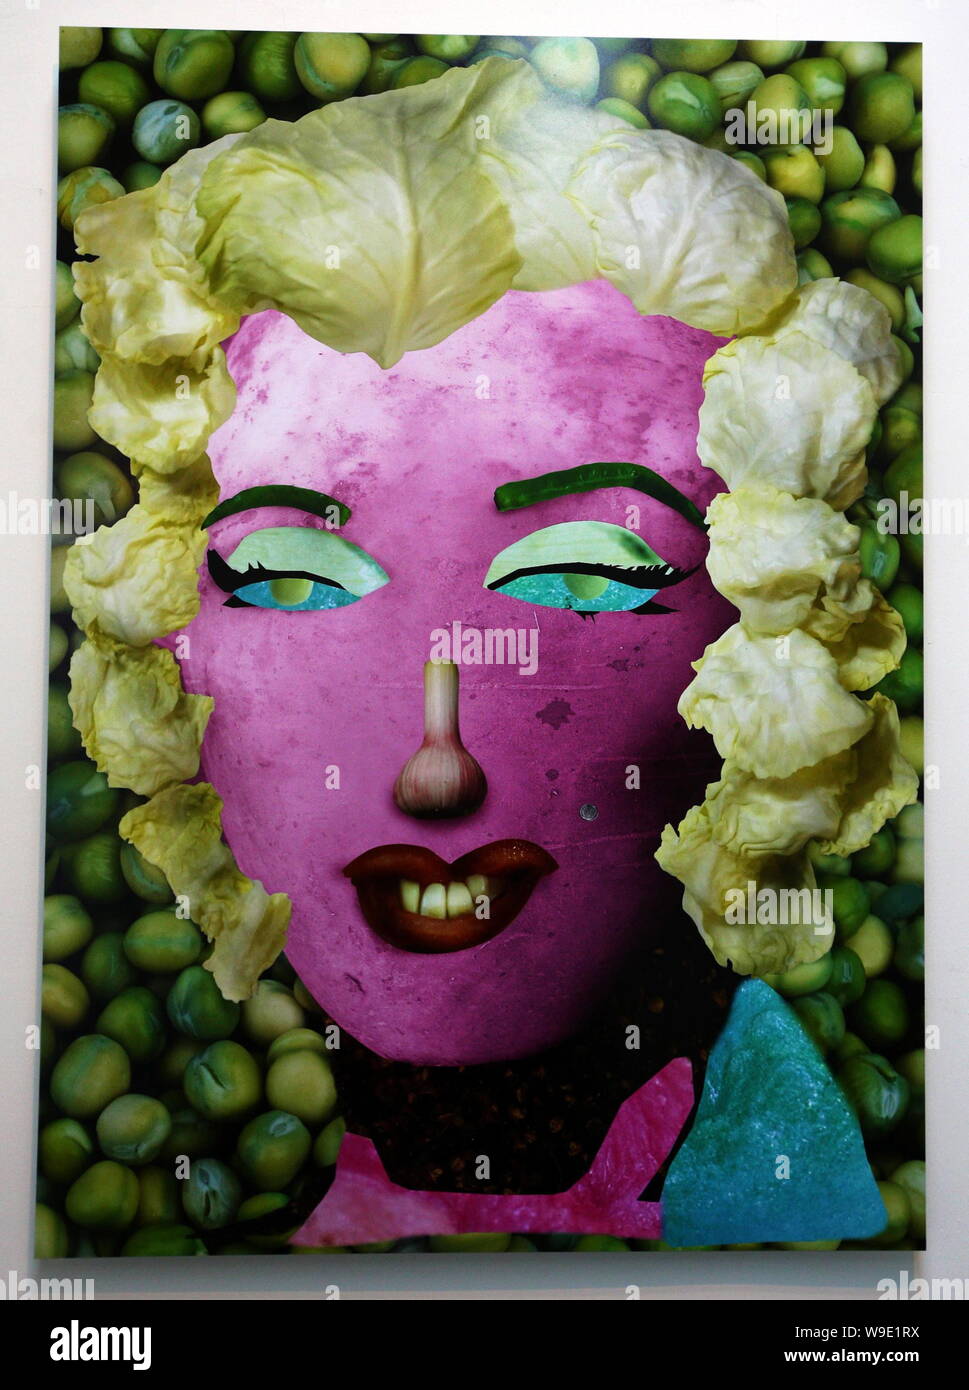 A vegetable-made replica of the famous painting Marilyn Monroe by Andy Warhol is seen during The Vegetable Museum, an exhibition of Chinese artist Ju Stock Photo